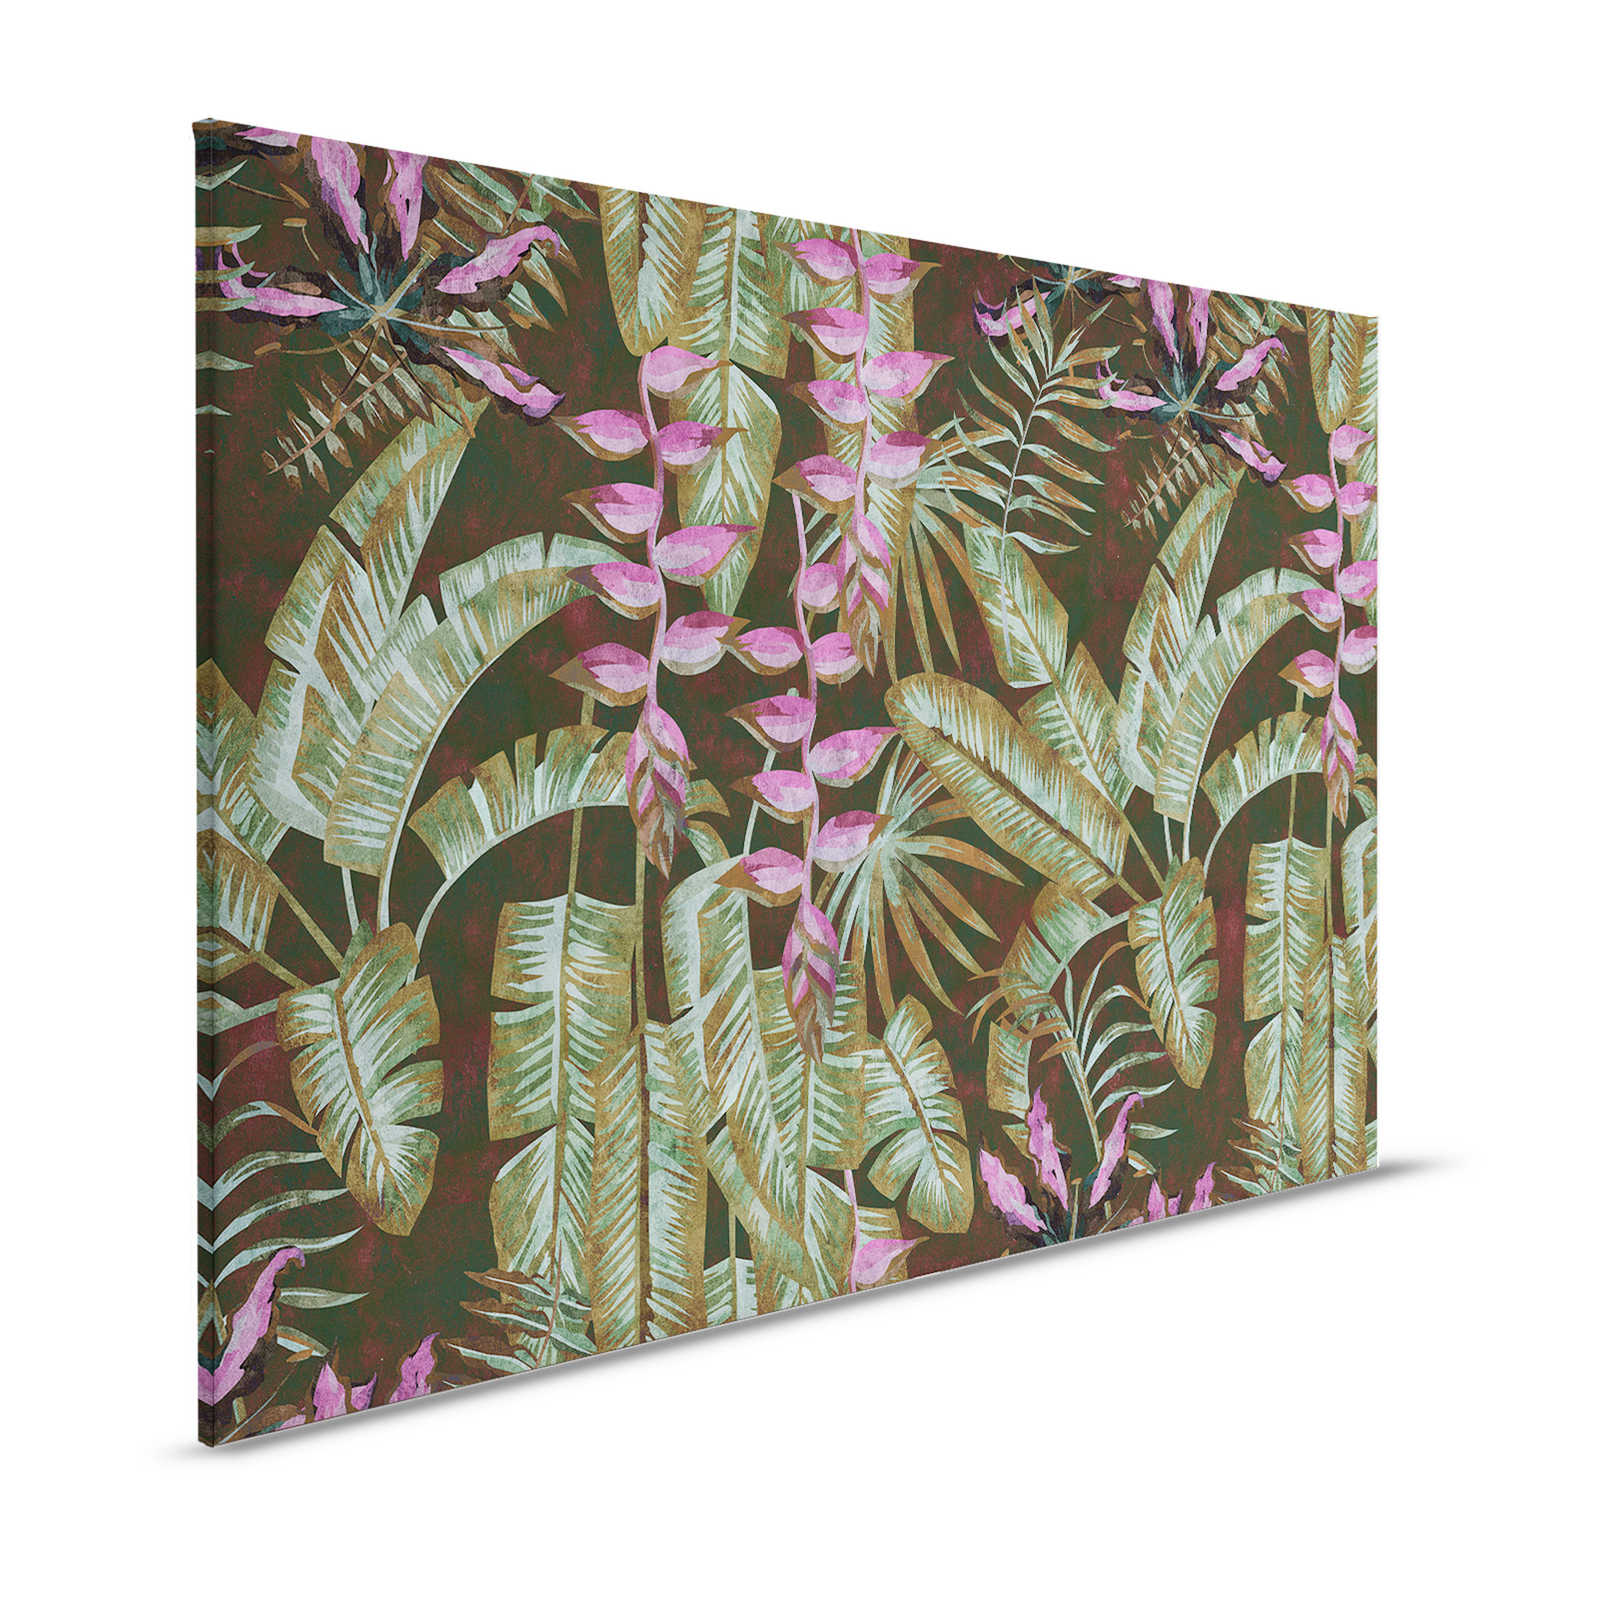 Tropicana 1 - Jungle Canvas Painting with Banana Leaves & Ferns - 1.20 m x 0.80 m
